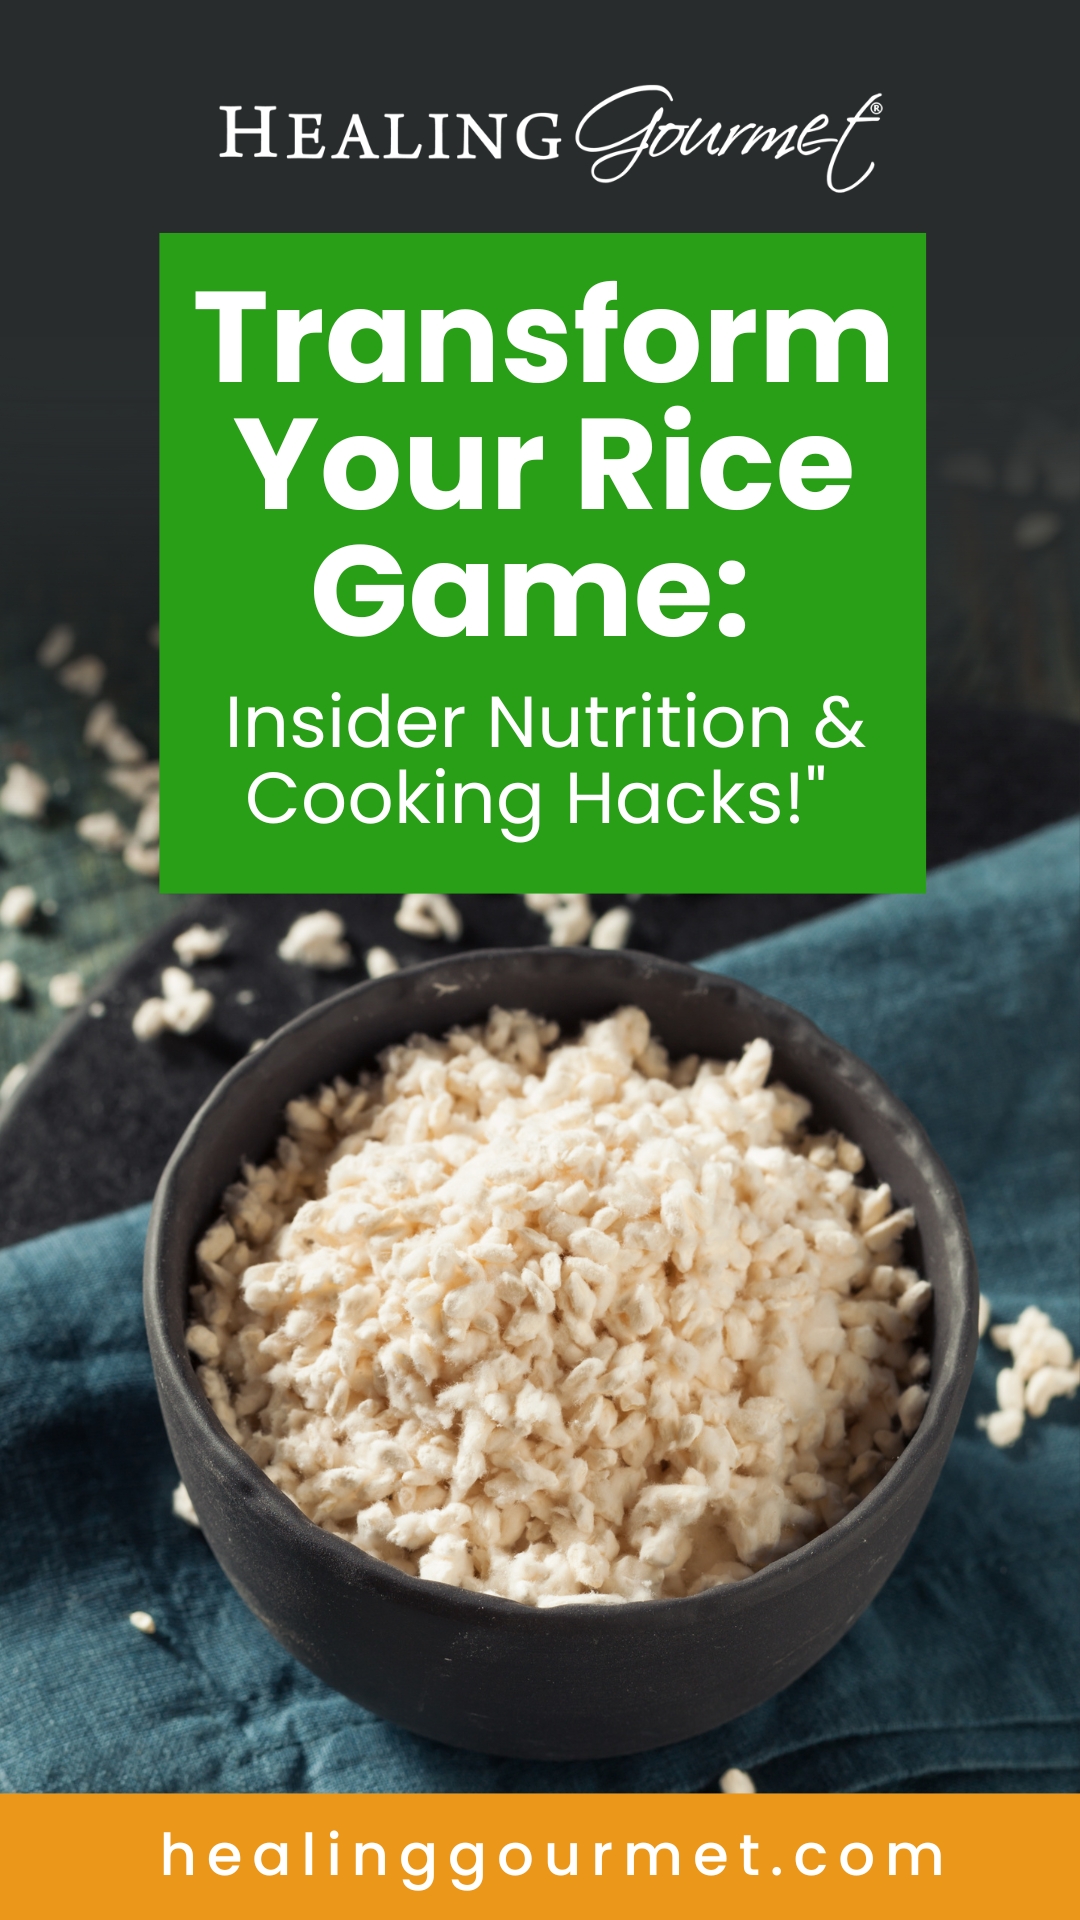 The Truth About Rice